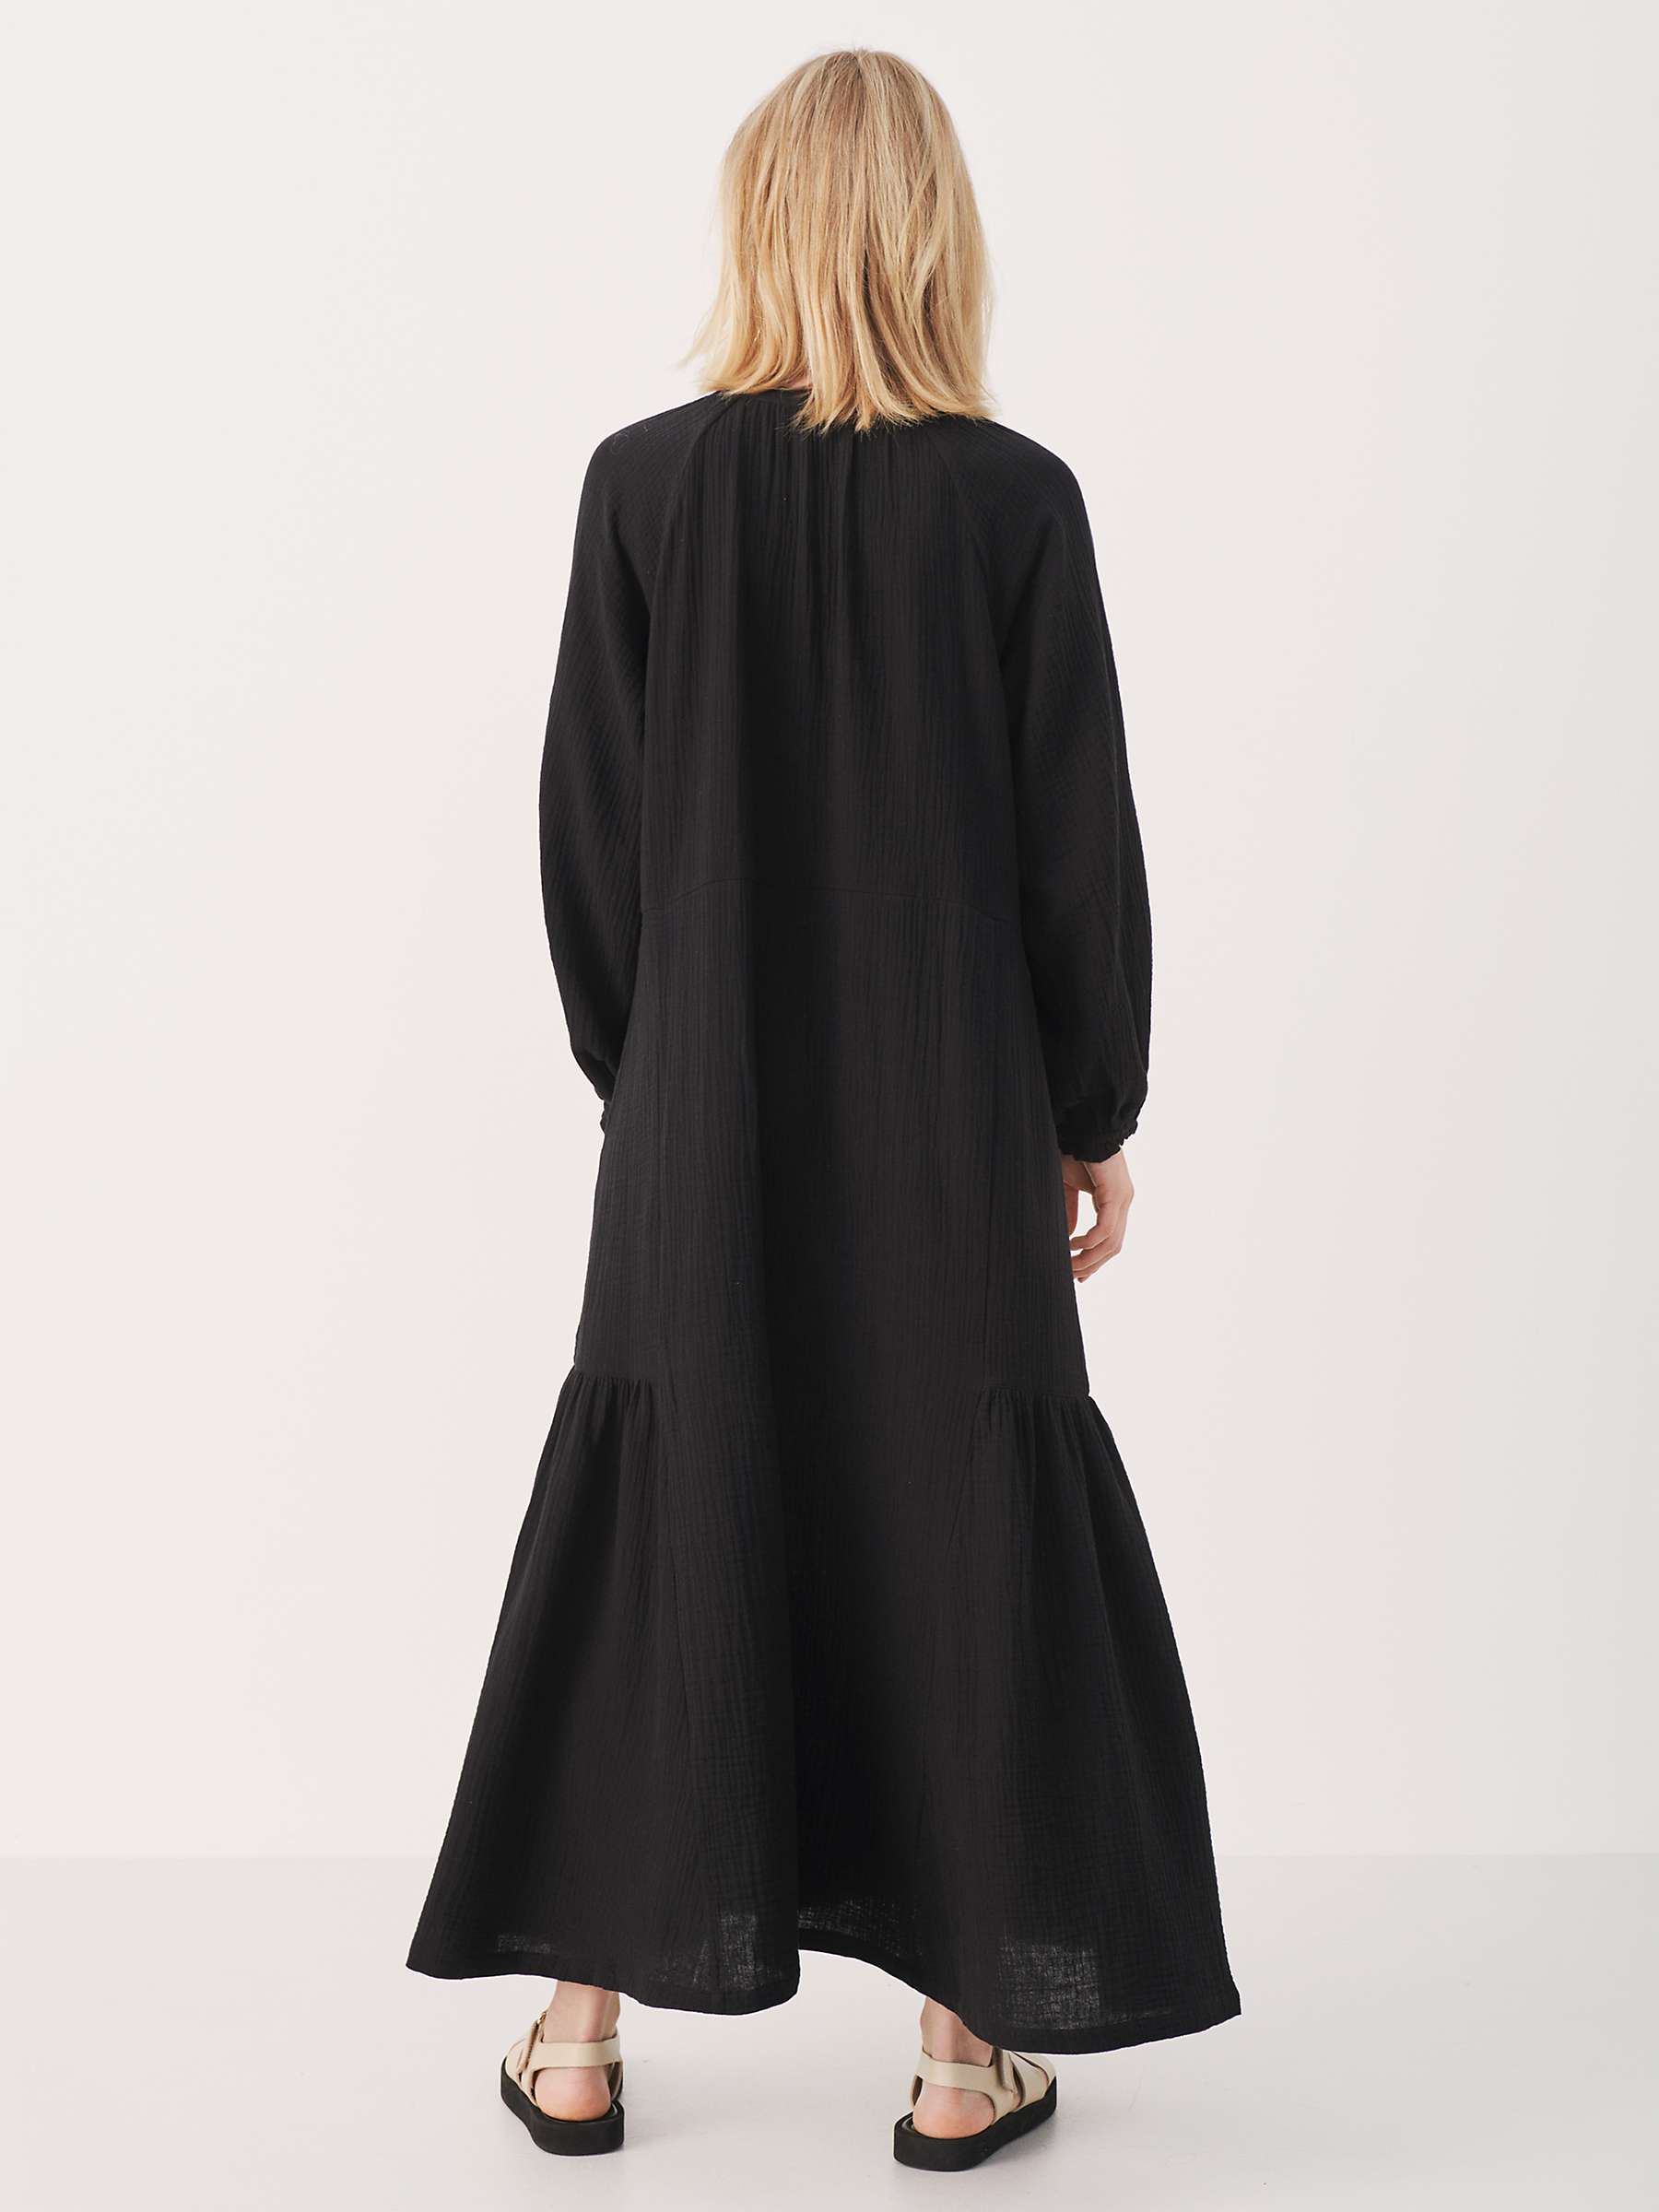 Buy Part Two Oanna Long Sleeve Maxi Dress, Black Online at johnlewis.com